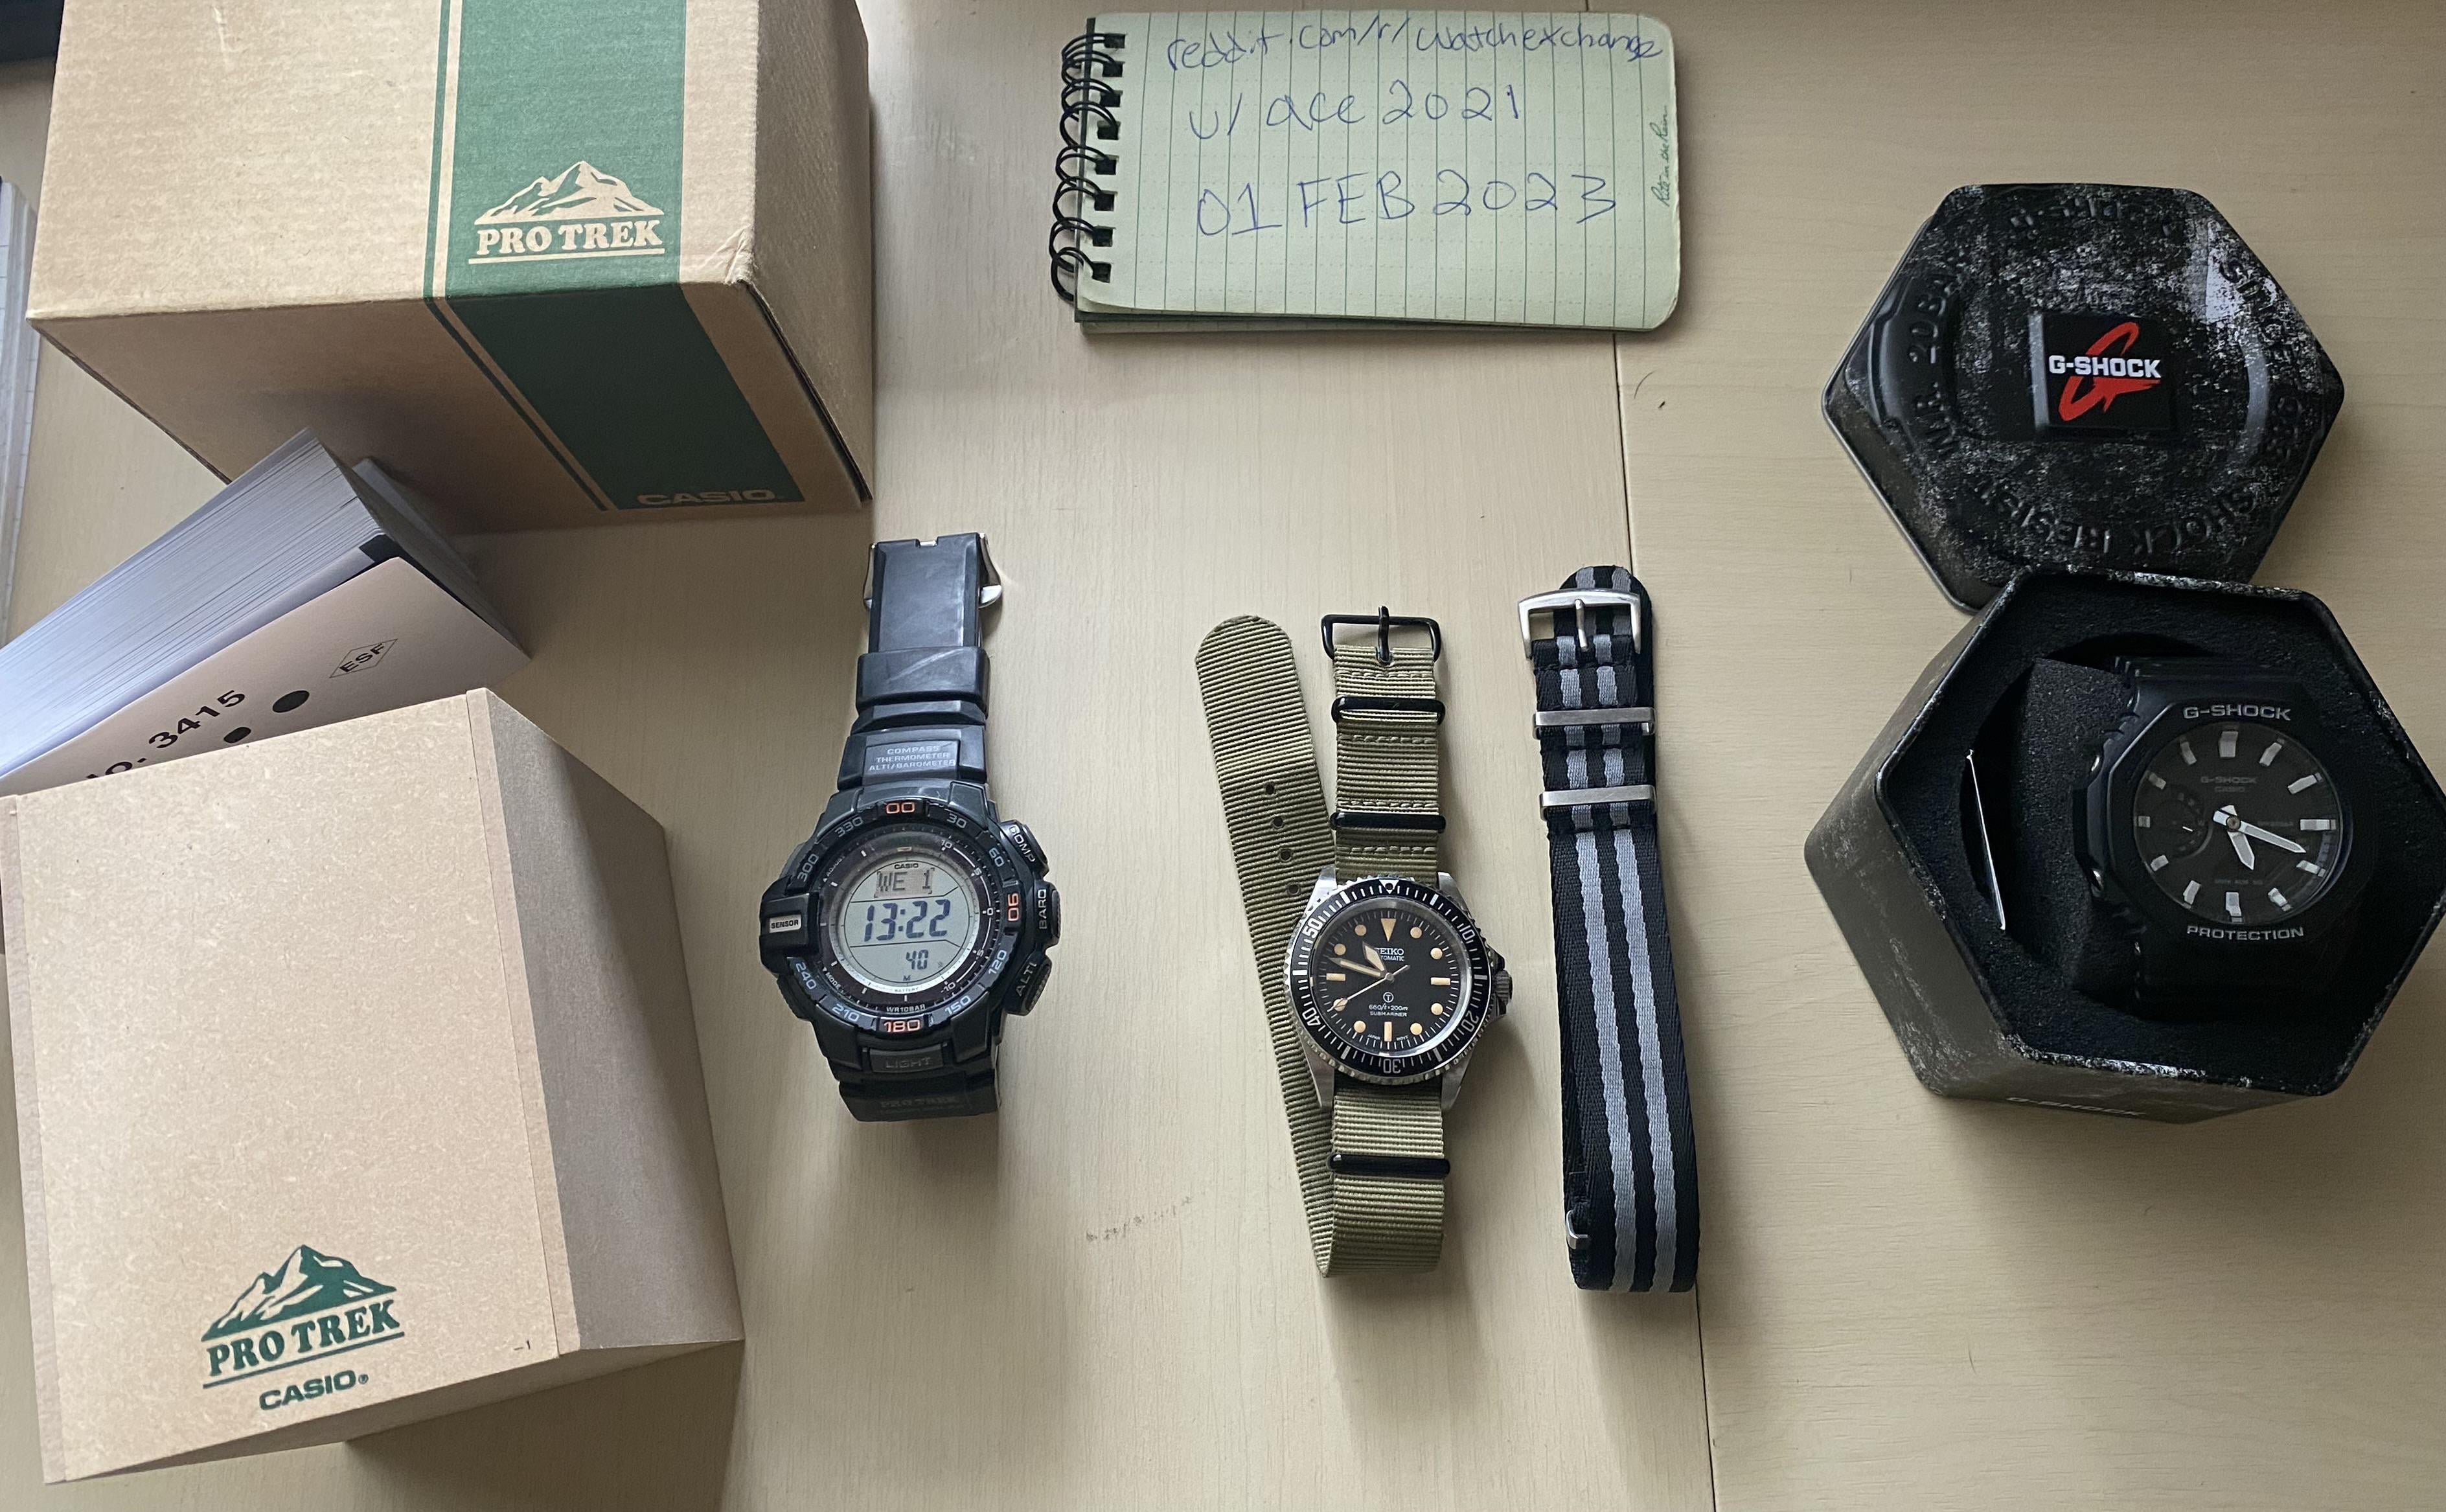 WTS] Seiko CasiOak GA 2100 1A (box + papers), PRG 270-1 + papers) | WatchCharts